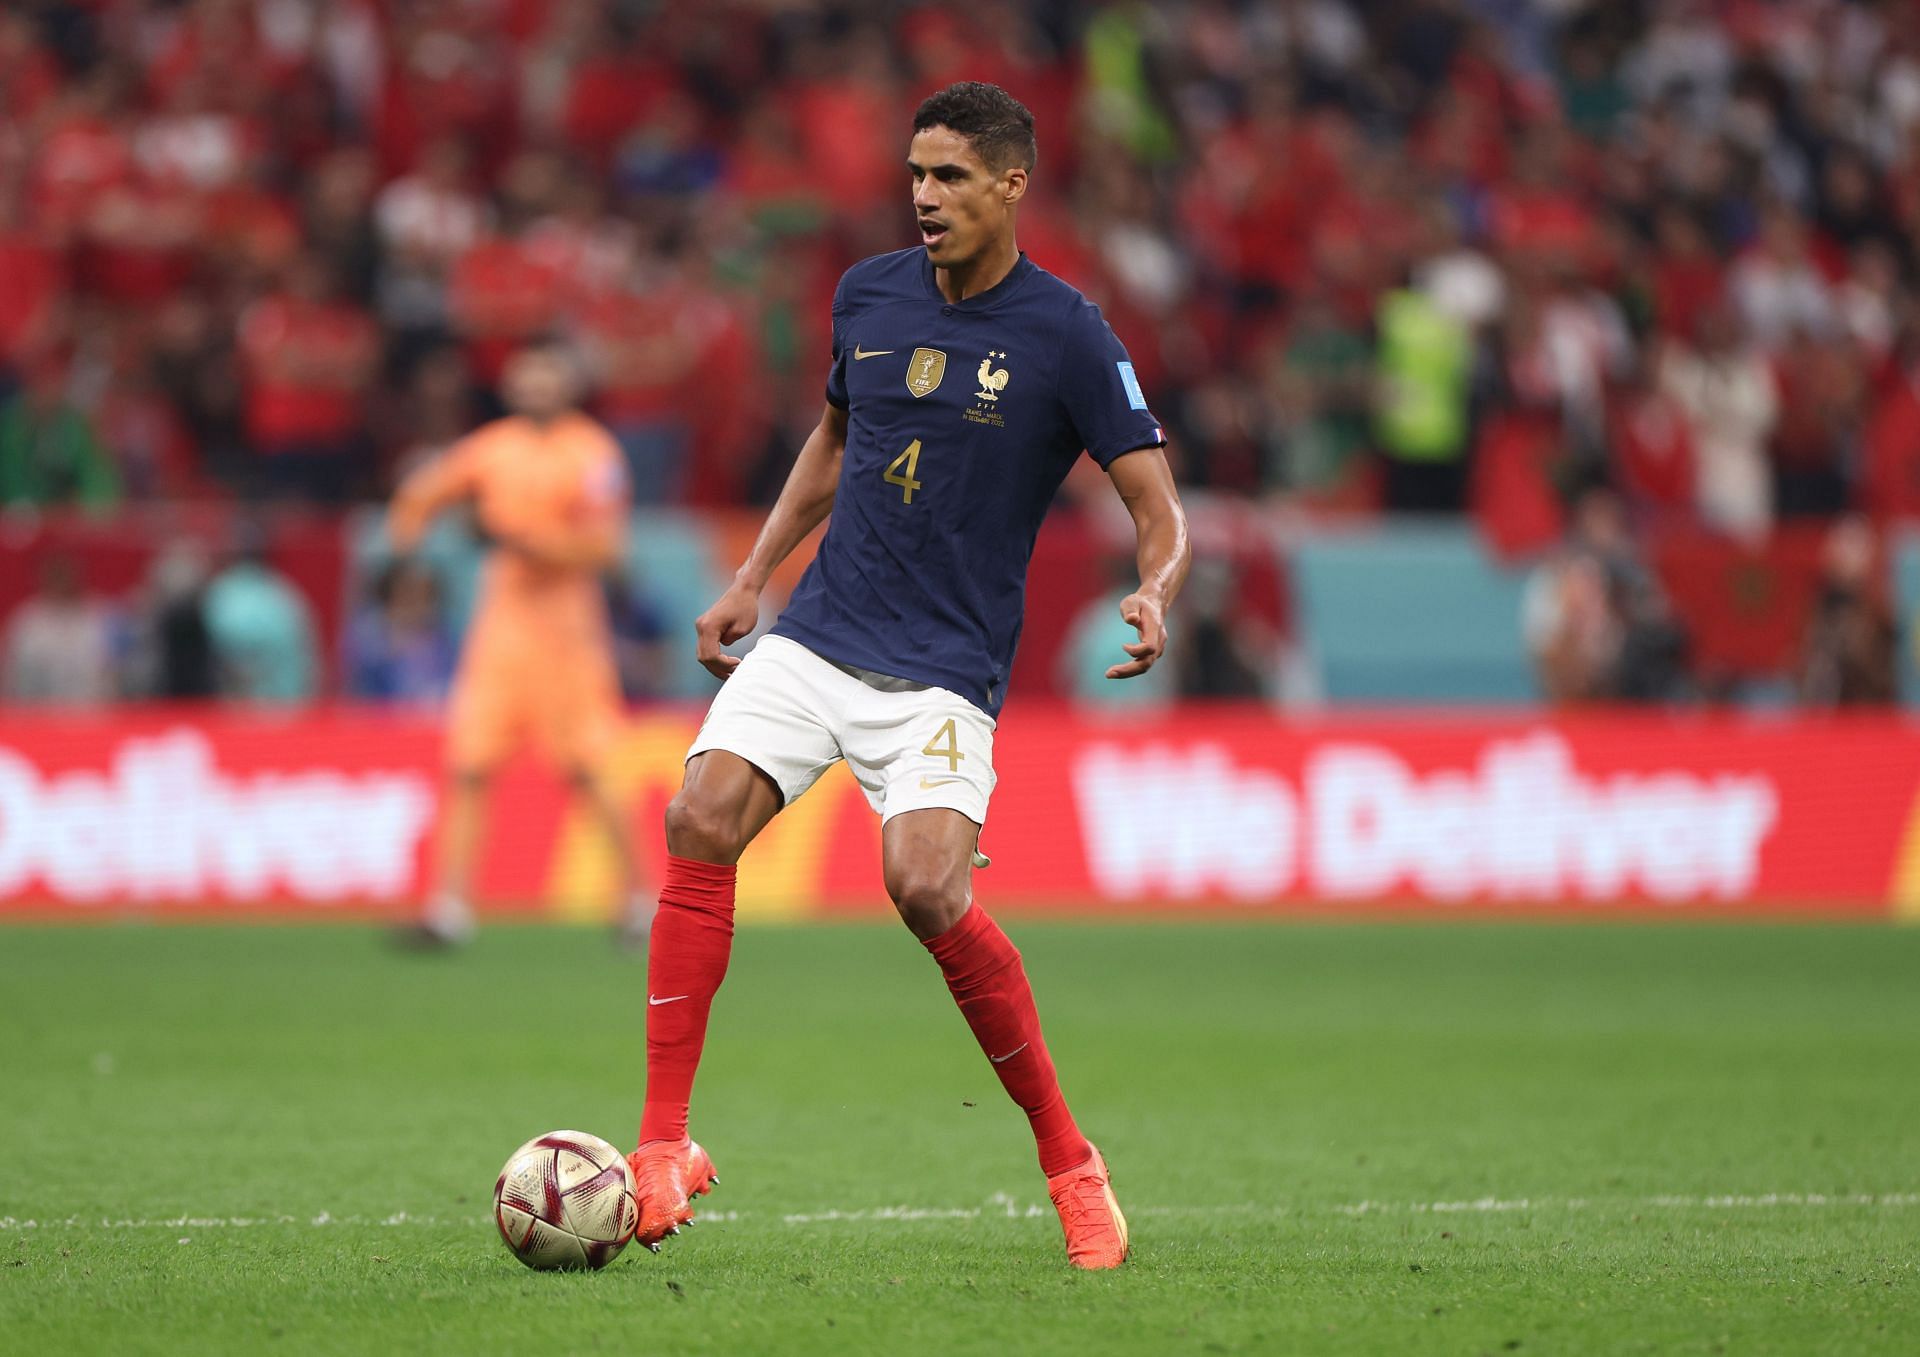 Raphael Varane is the youngest national team capatin in French football history